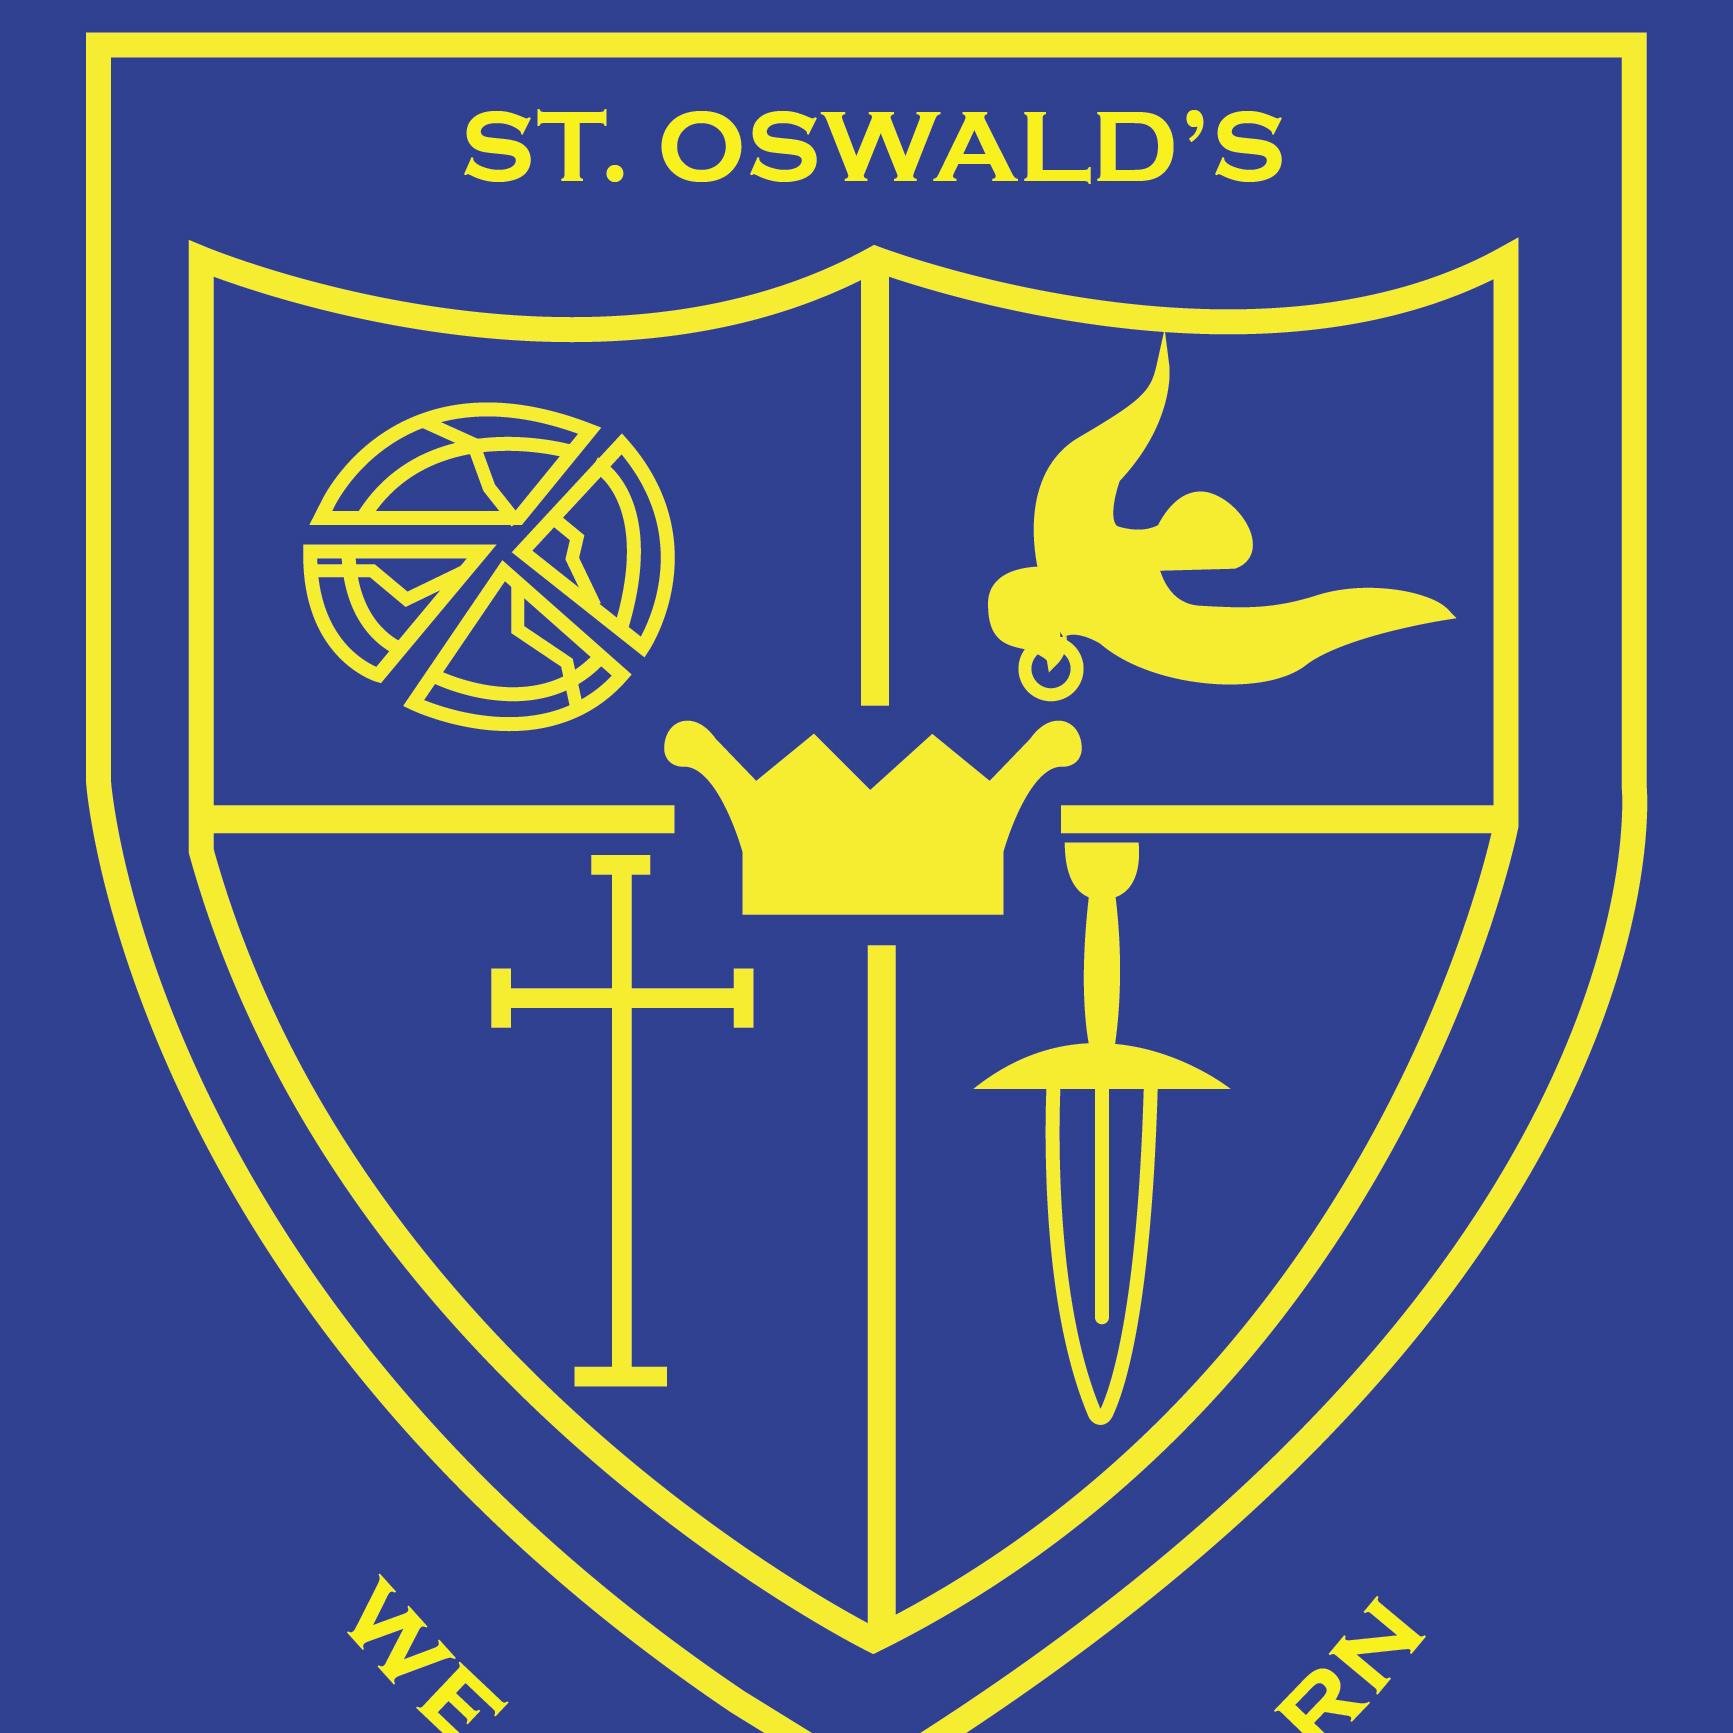 Welcome to St Oswald's CE Primary Academy. Find us on Facebook or look on our website.